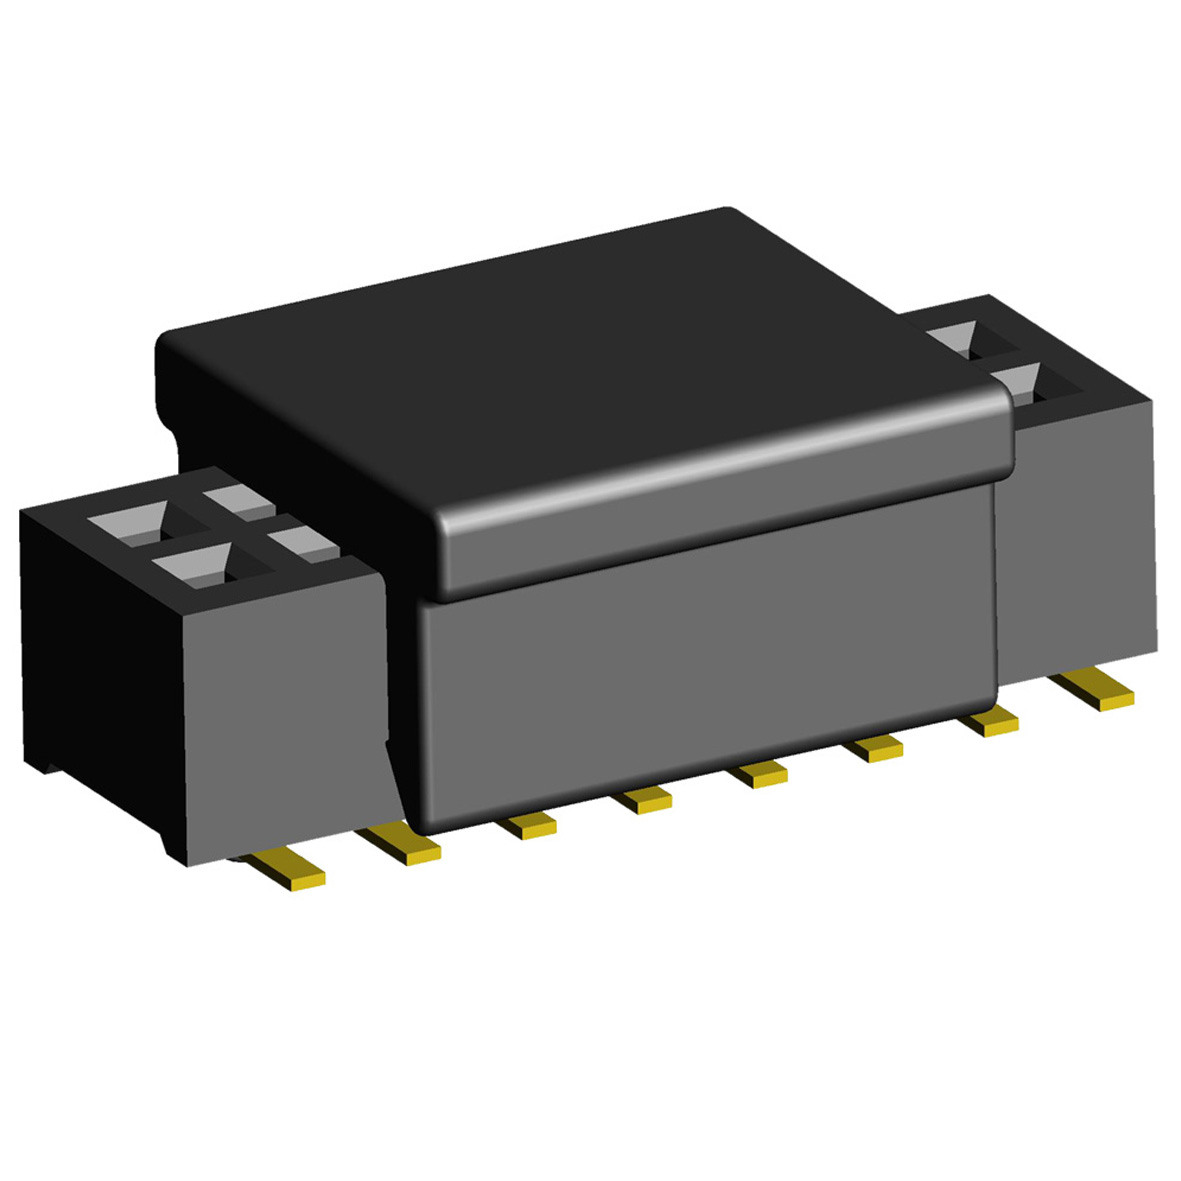 2192SM4-XXXG-CP series, double row straight sockets with guides on PCB for surface mounting (SMD), pitch 1.00 mm, 2x50 pins